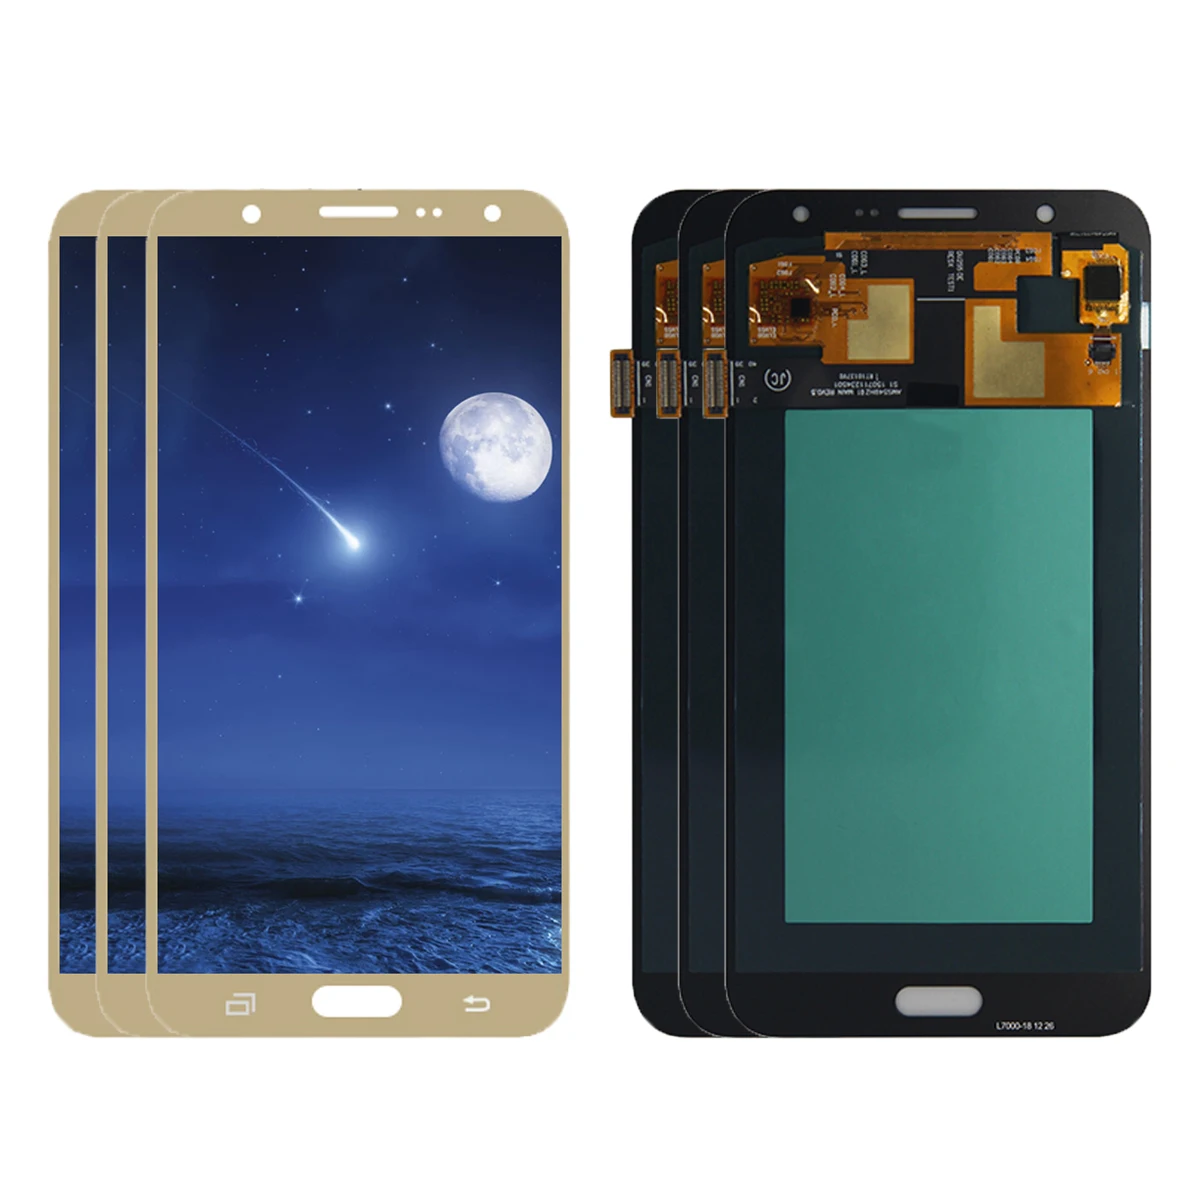 Wholesale 3/5 PCS LCD For Samsung Galaxy J7 2015 J700 J700F J700H J700M J700T J700P Display with Touch Screen Digitizer Assembly enlarge